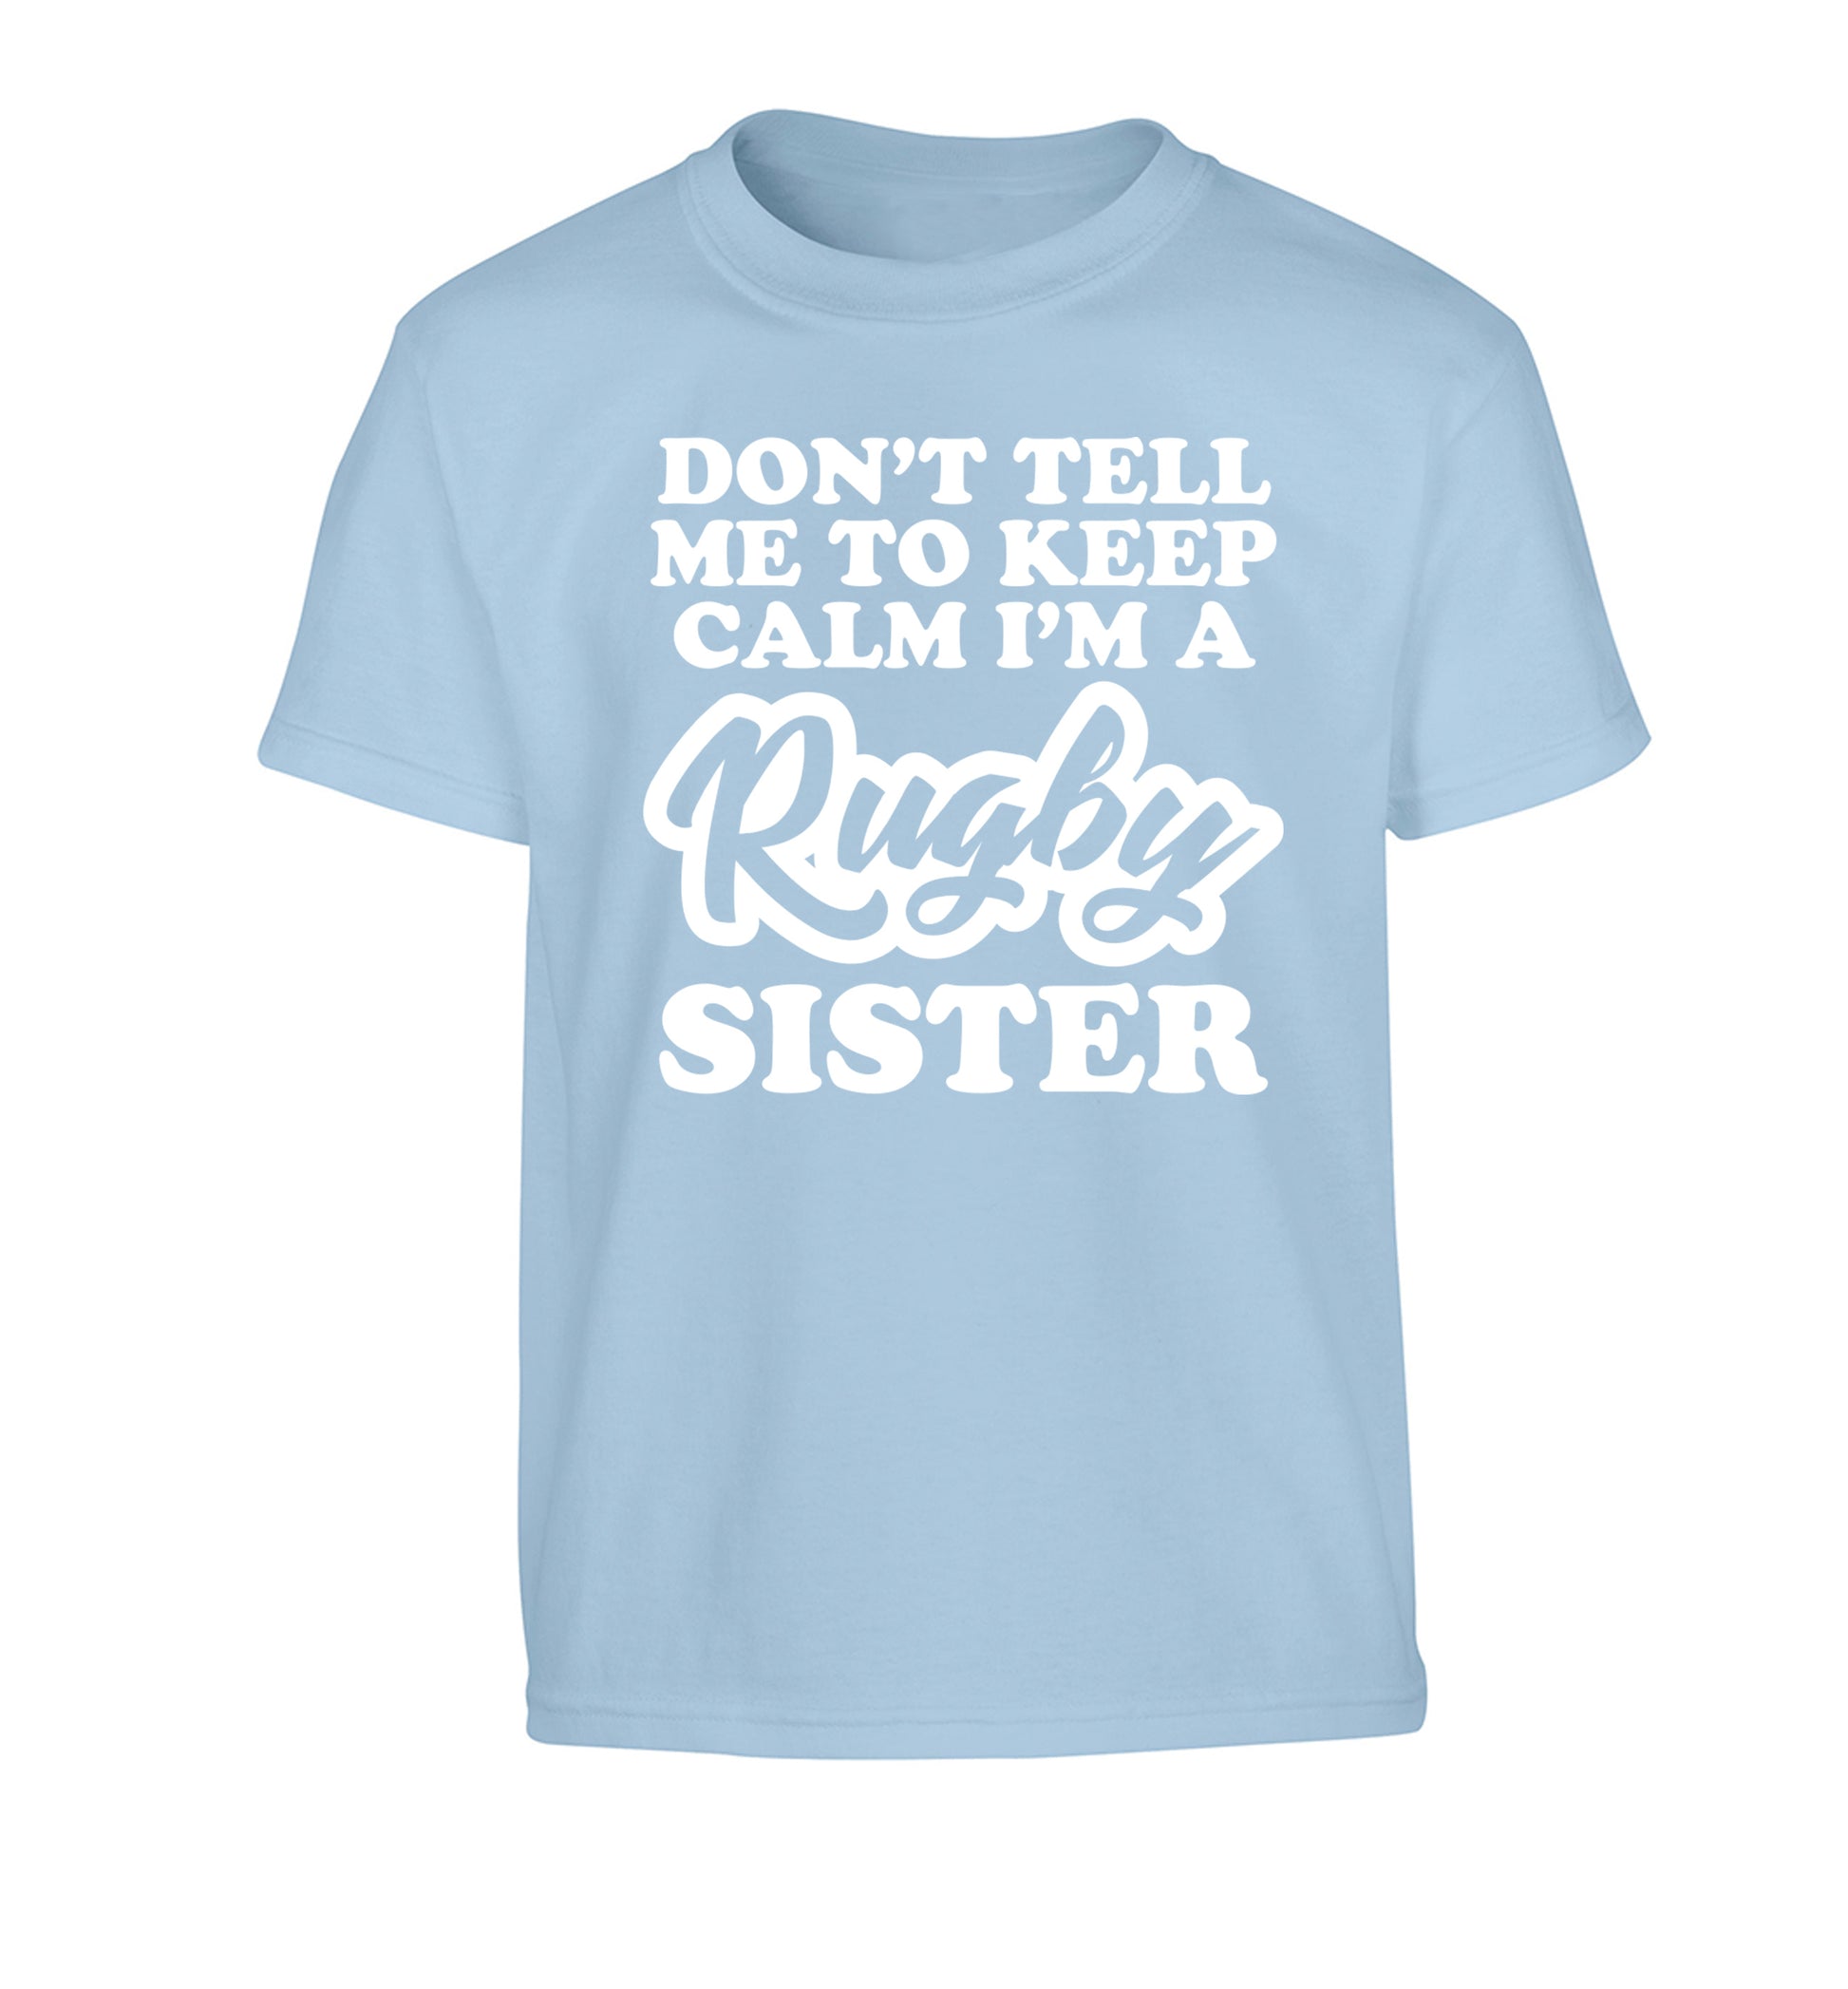 Don't tell me keep calm I'm a rugby sister Children's light blue Tshirt 12-13 Years